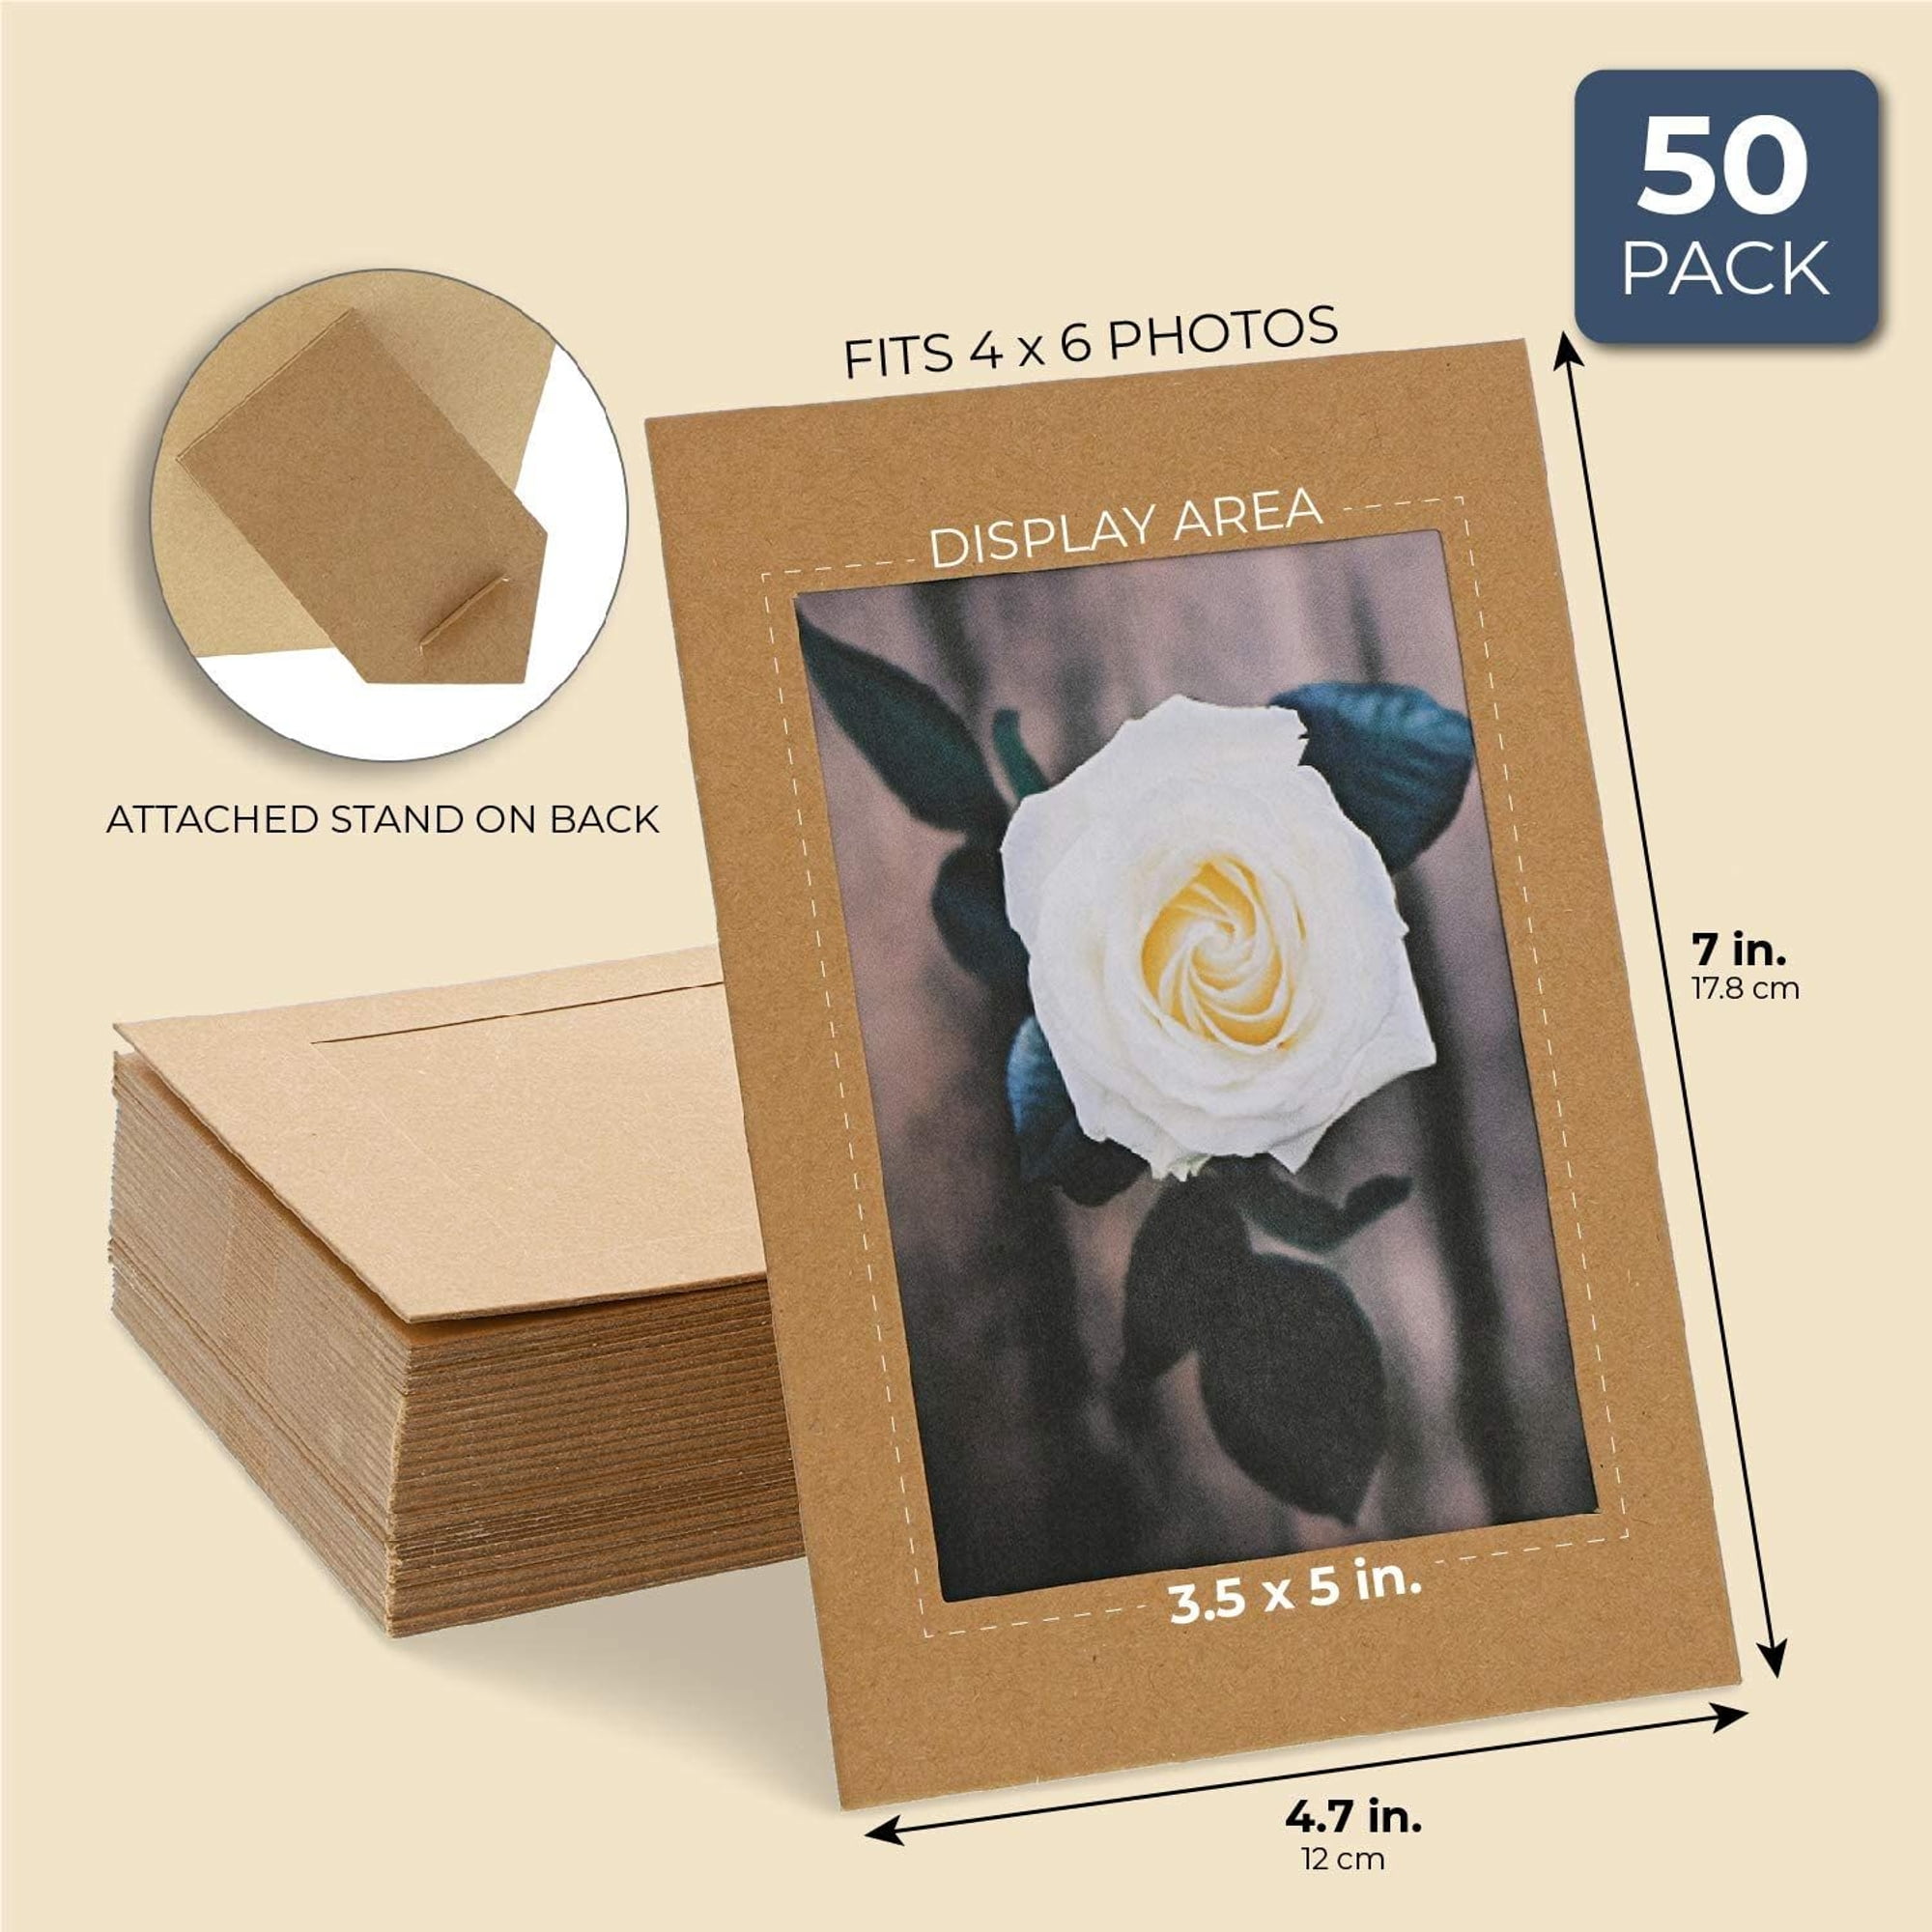 Litpoetic 100 Pack Standing Paper Picture Frames 4x6,Cardboard Photo Frame  with Easel,Paper Photo Frame Cards,Gallery Frames Bulk For Father's